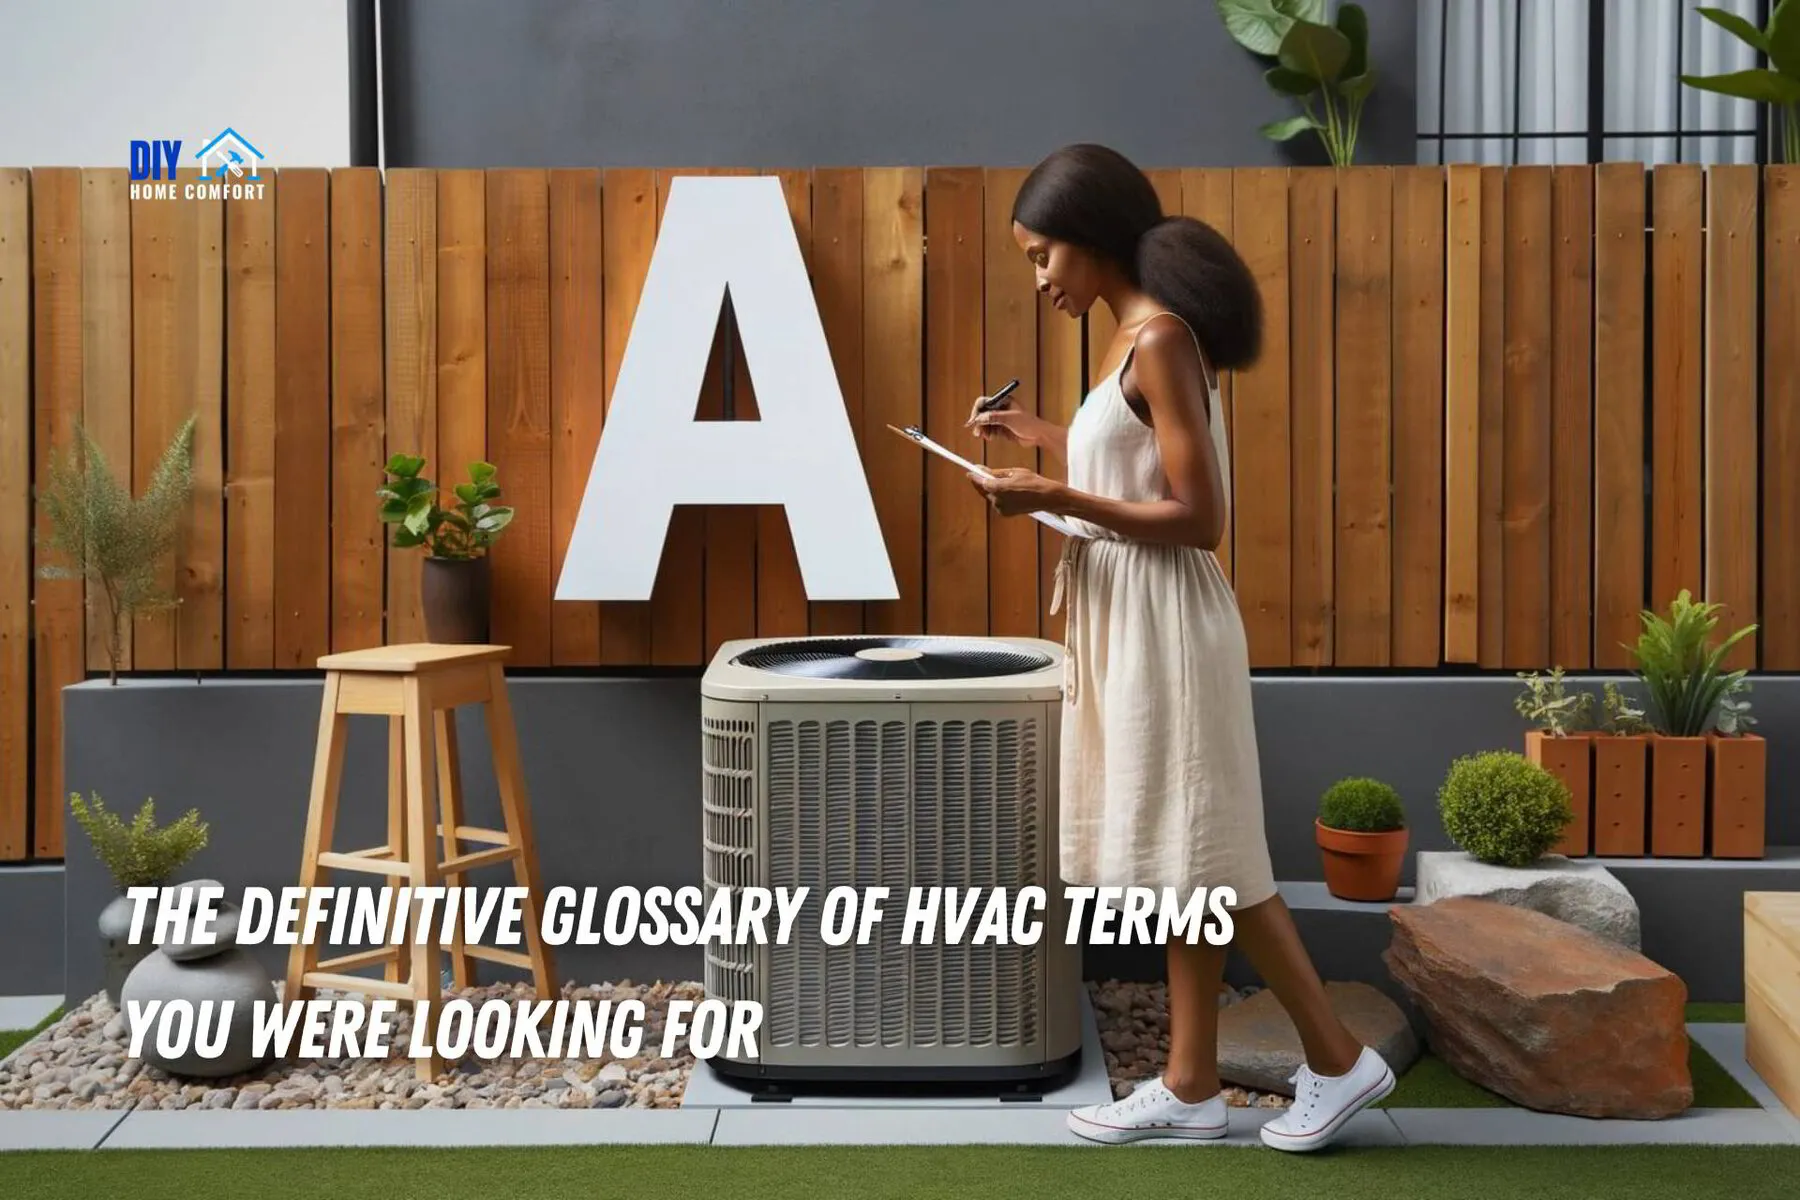 The Definitive Glossary of HVAC Terms You Were Looking For | DIY Home Comfort